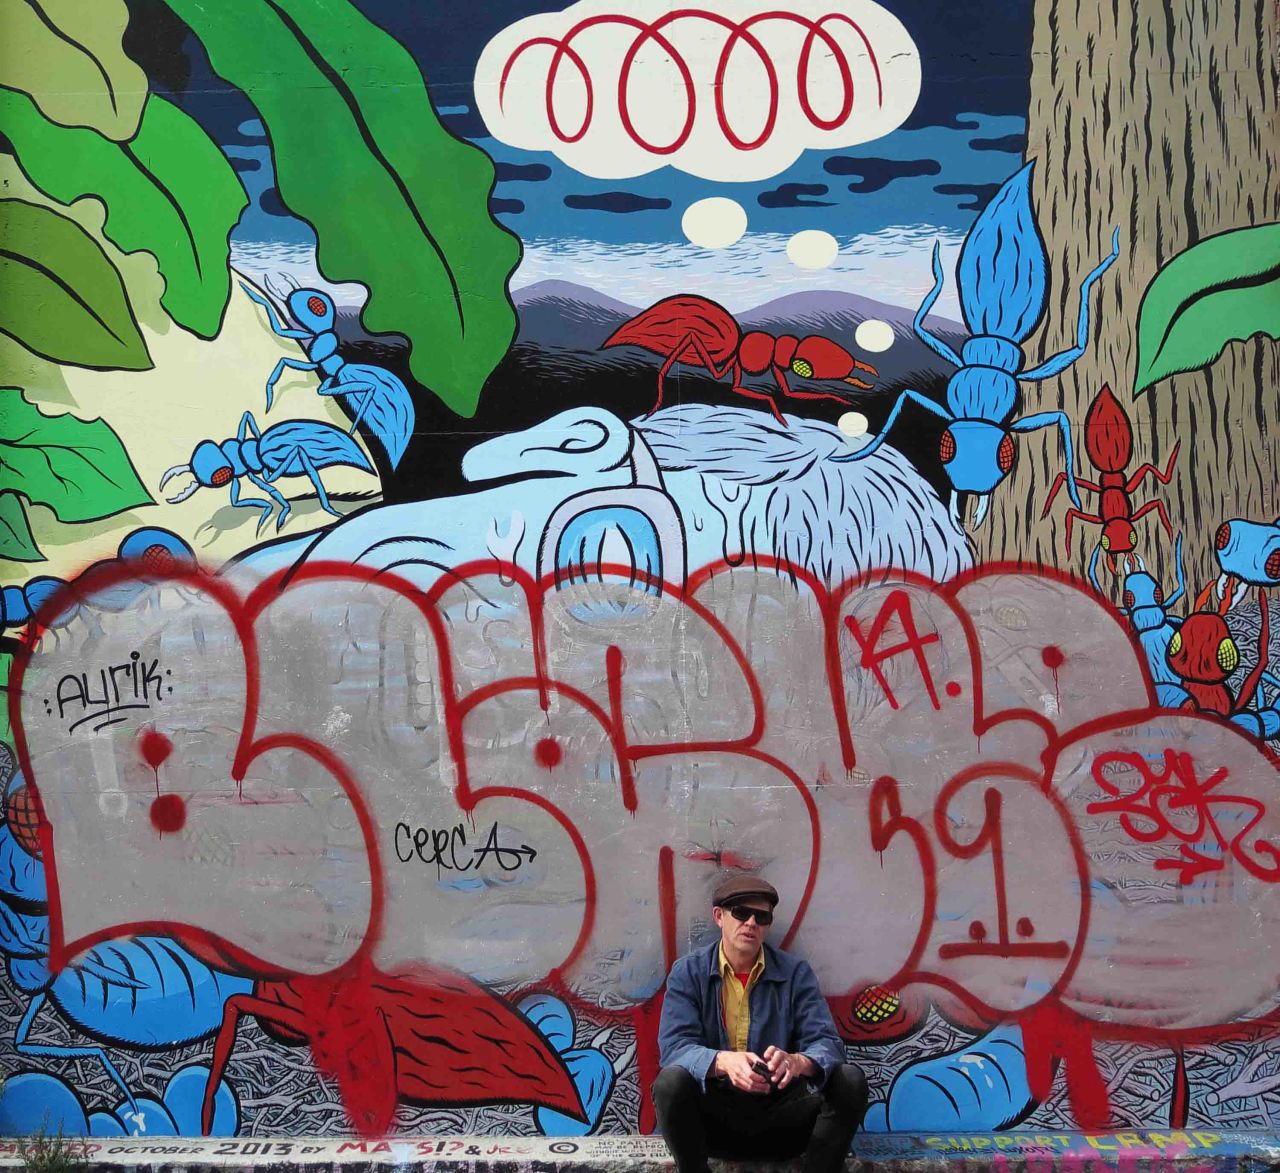 Mats Stromberg (pictured) completed his "Giant Selfie" mural in San Francisco's Mission District in 2013, but blobs of silver-colored letters outlined in red, spelling the name "Blake," smothered much of it in July.